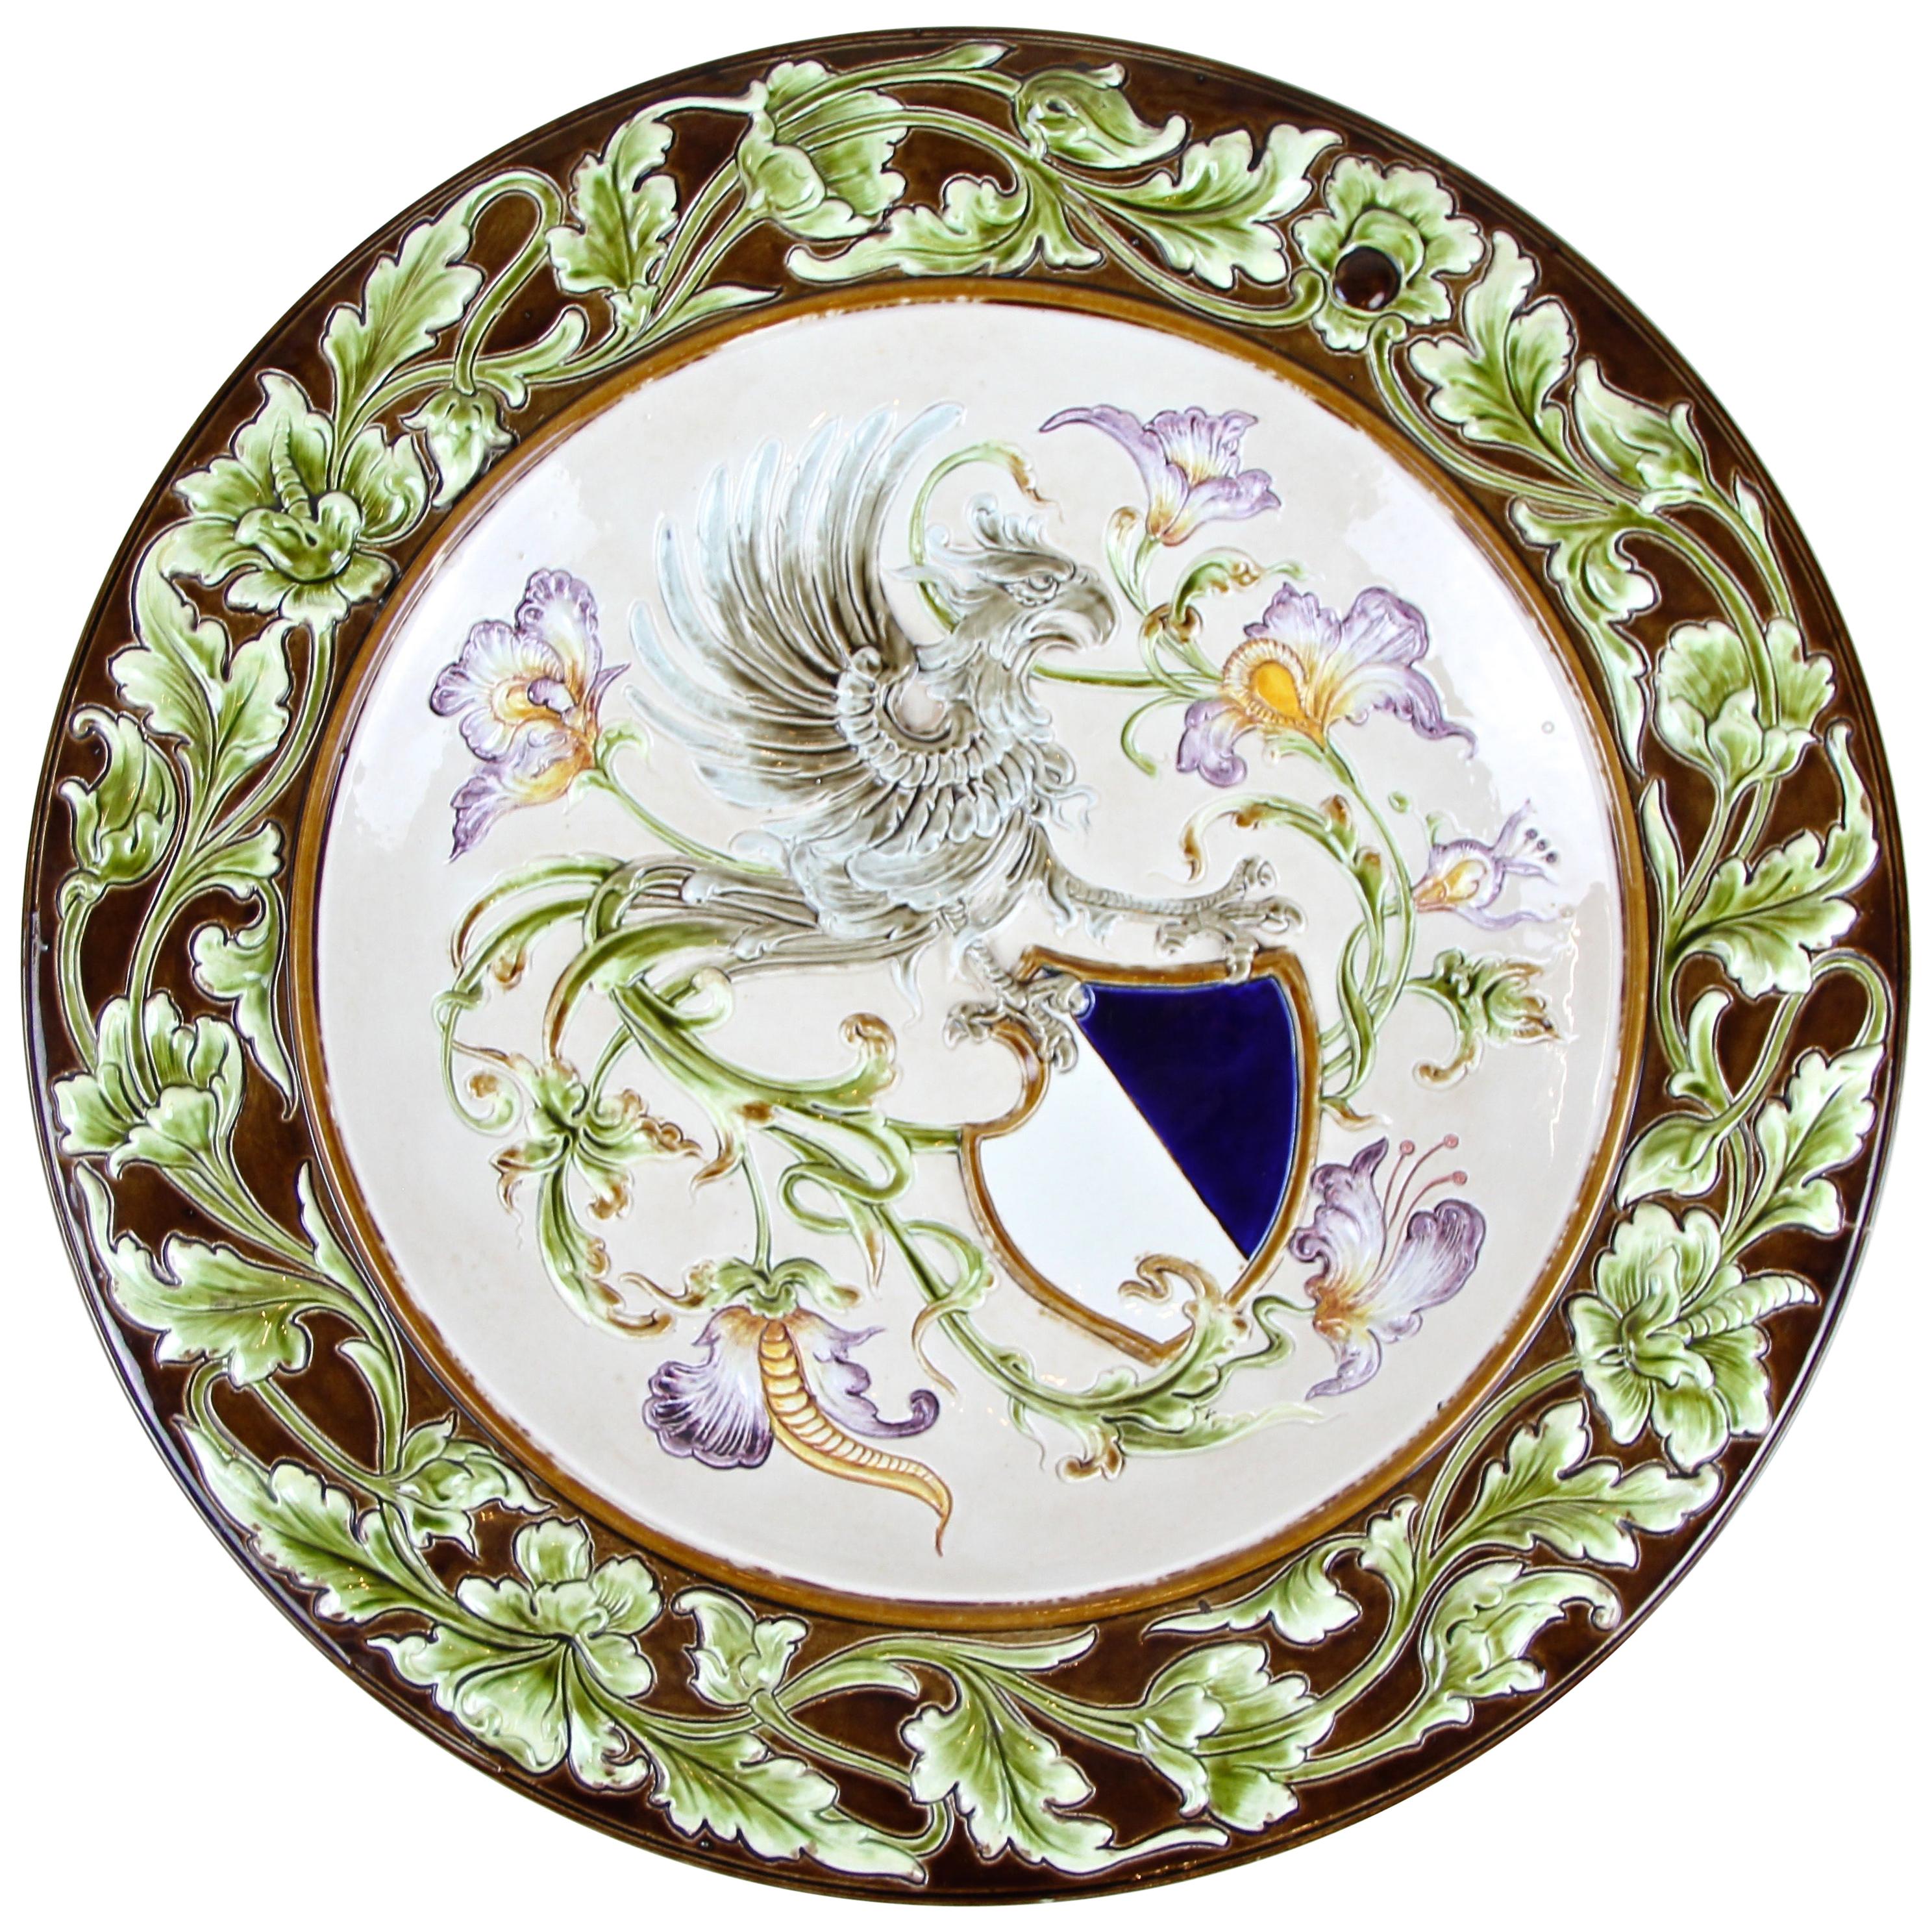 Large Majolica Wall Plate by Wilhelm Schiller & Son, Bohemia, circa 1890